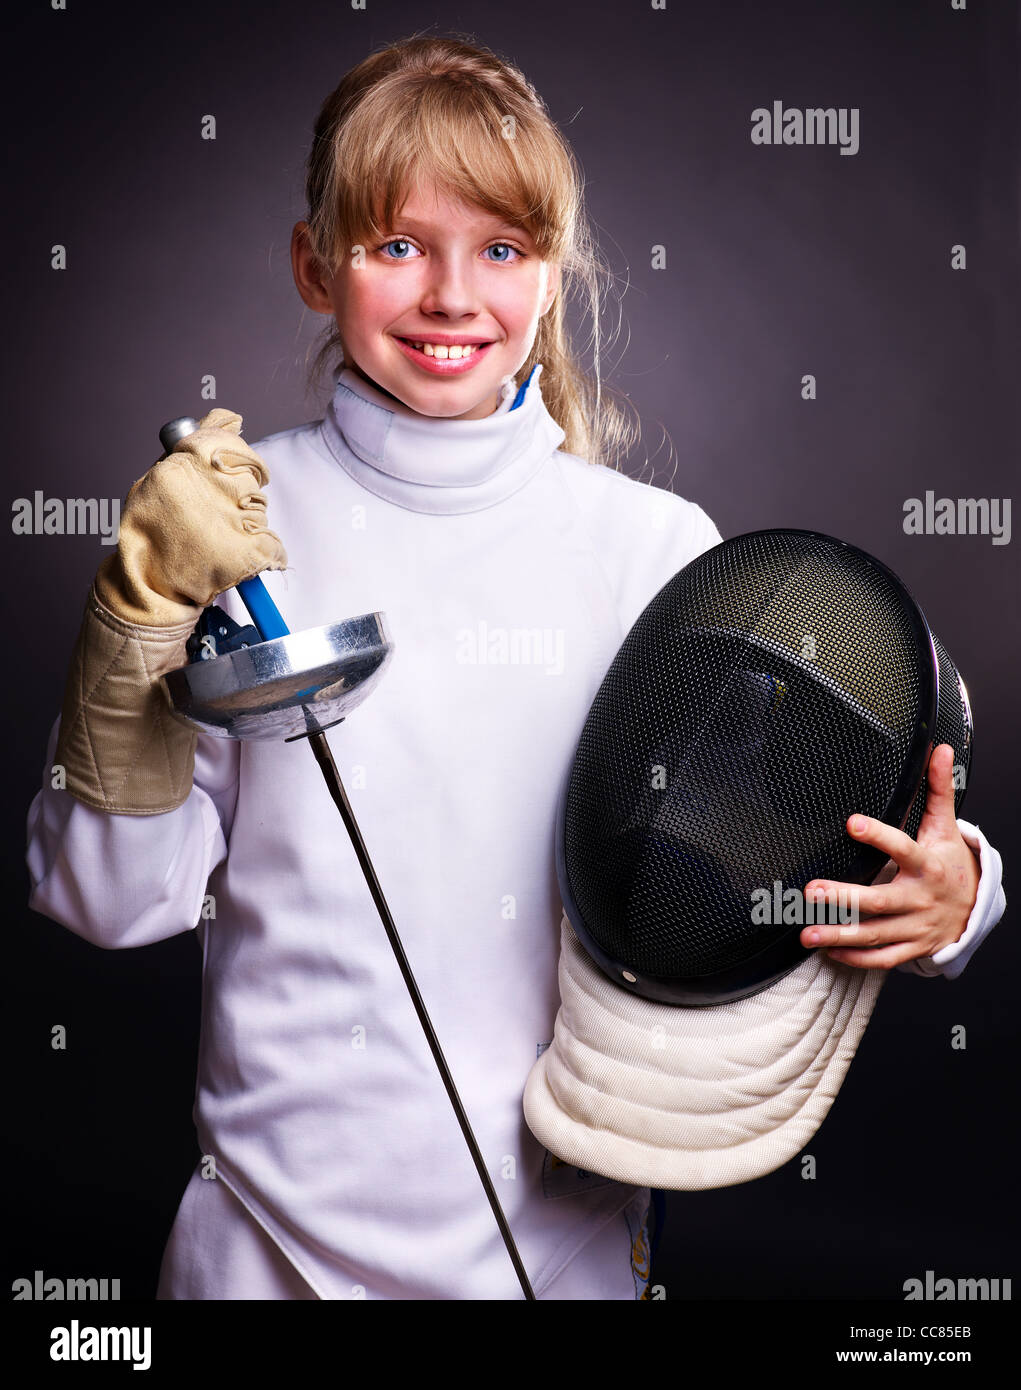 Child in fencing costume holding epee . Black background. Stock Photo